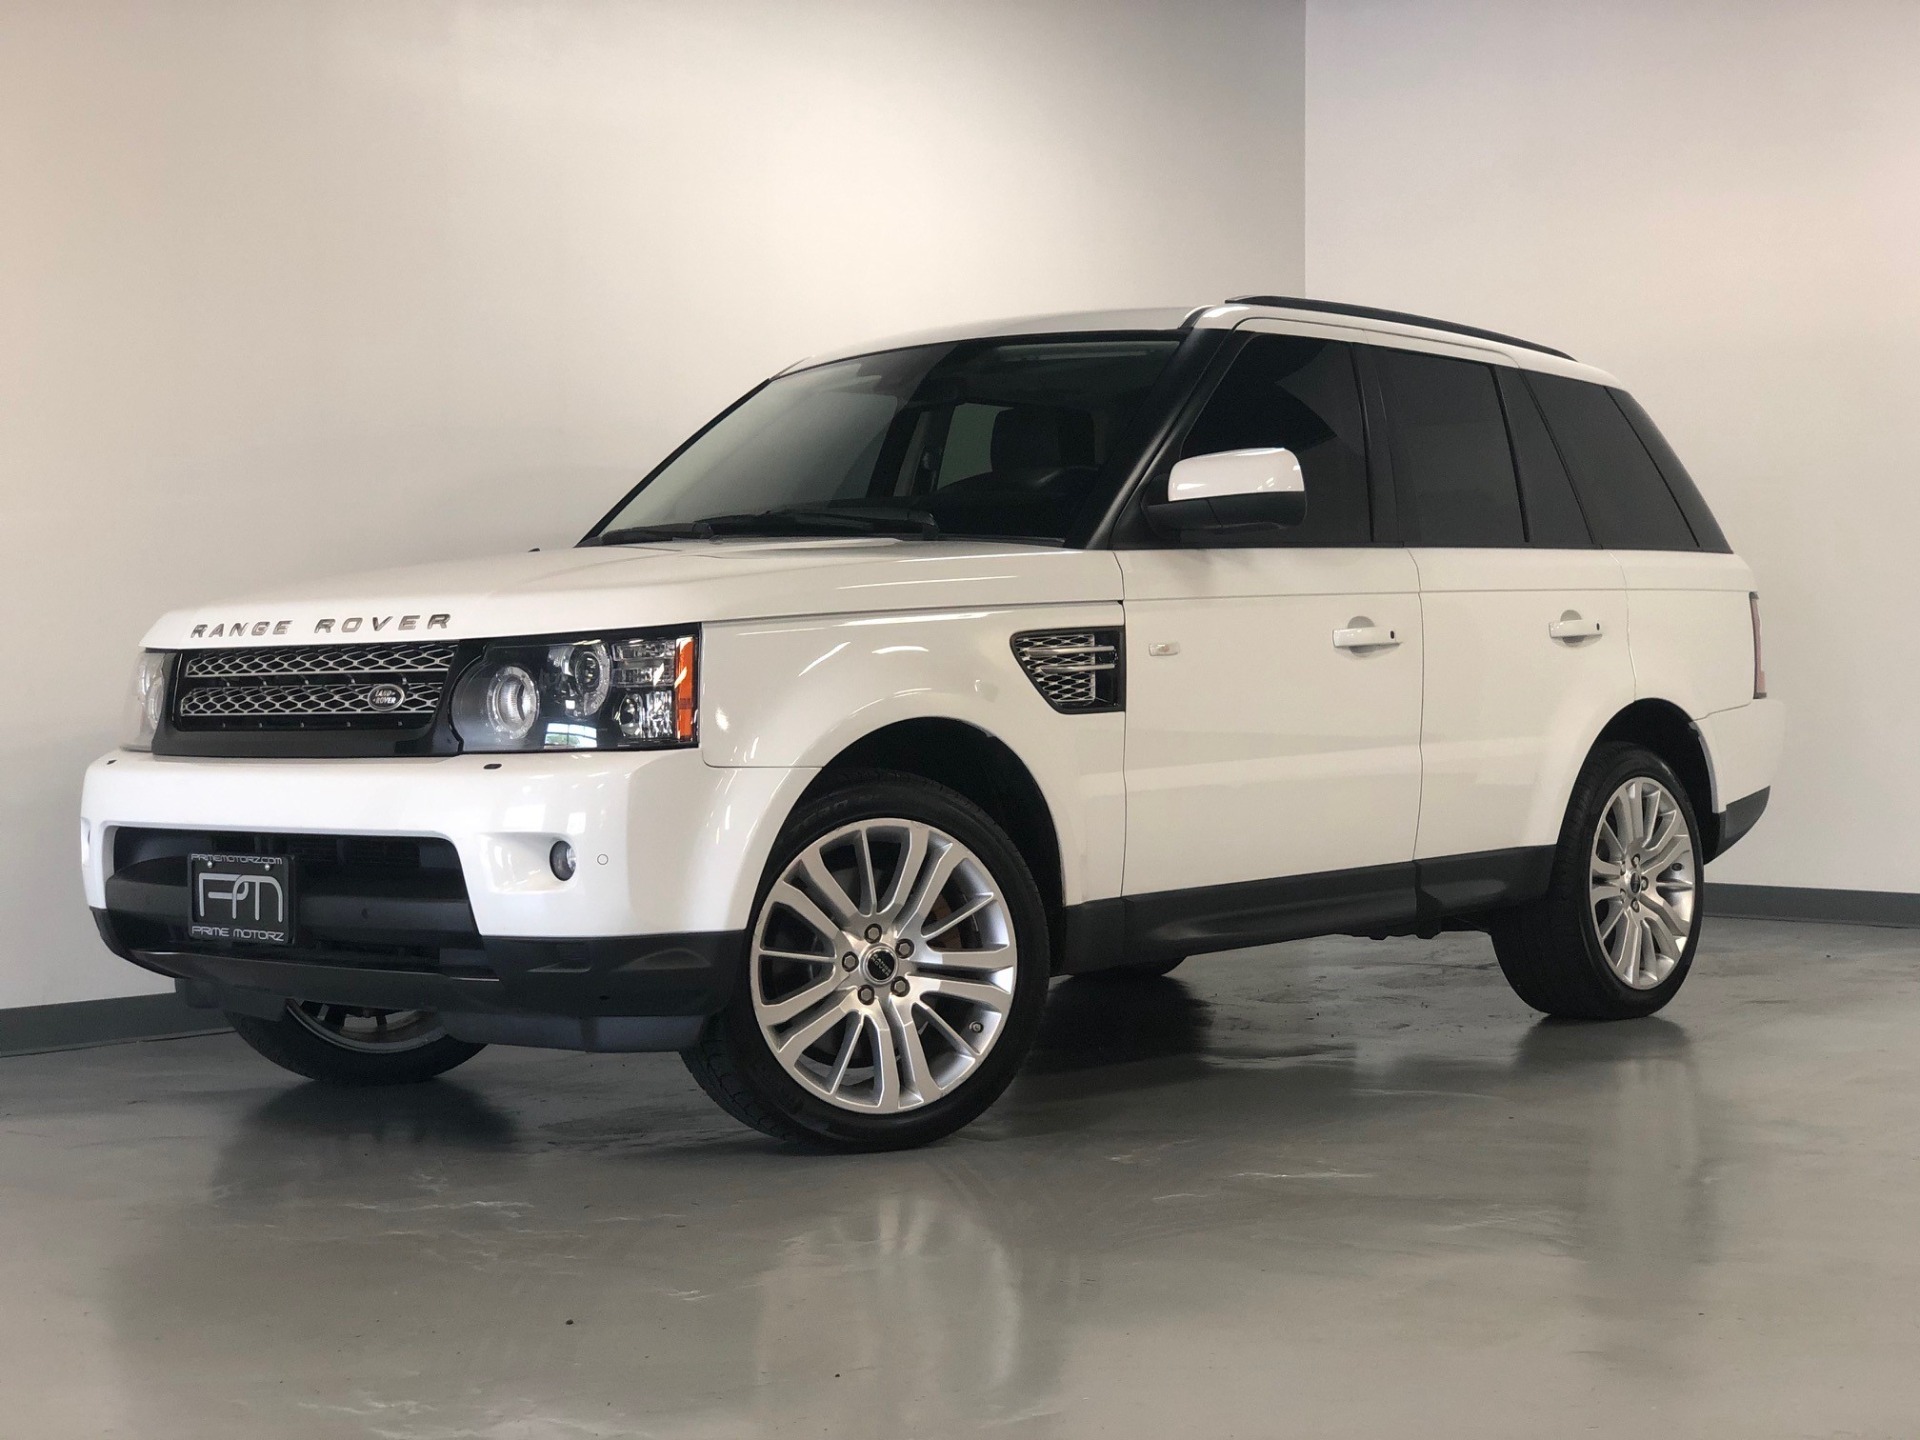 vrouw wedstrijd leraar Used 2013 Fuji White Land Rover Range Rover Sport HSE LUX AWD HSE LUX For  Sale (Sold) | Prime Motorz Stock #2751